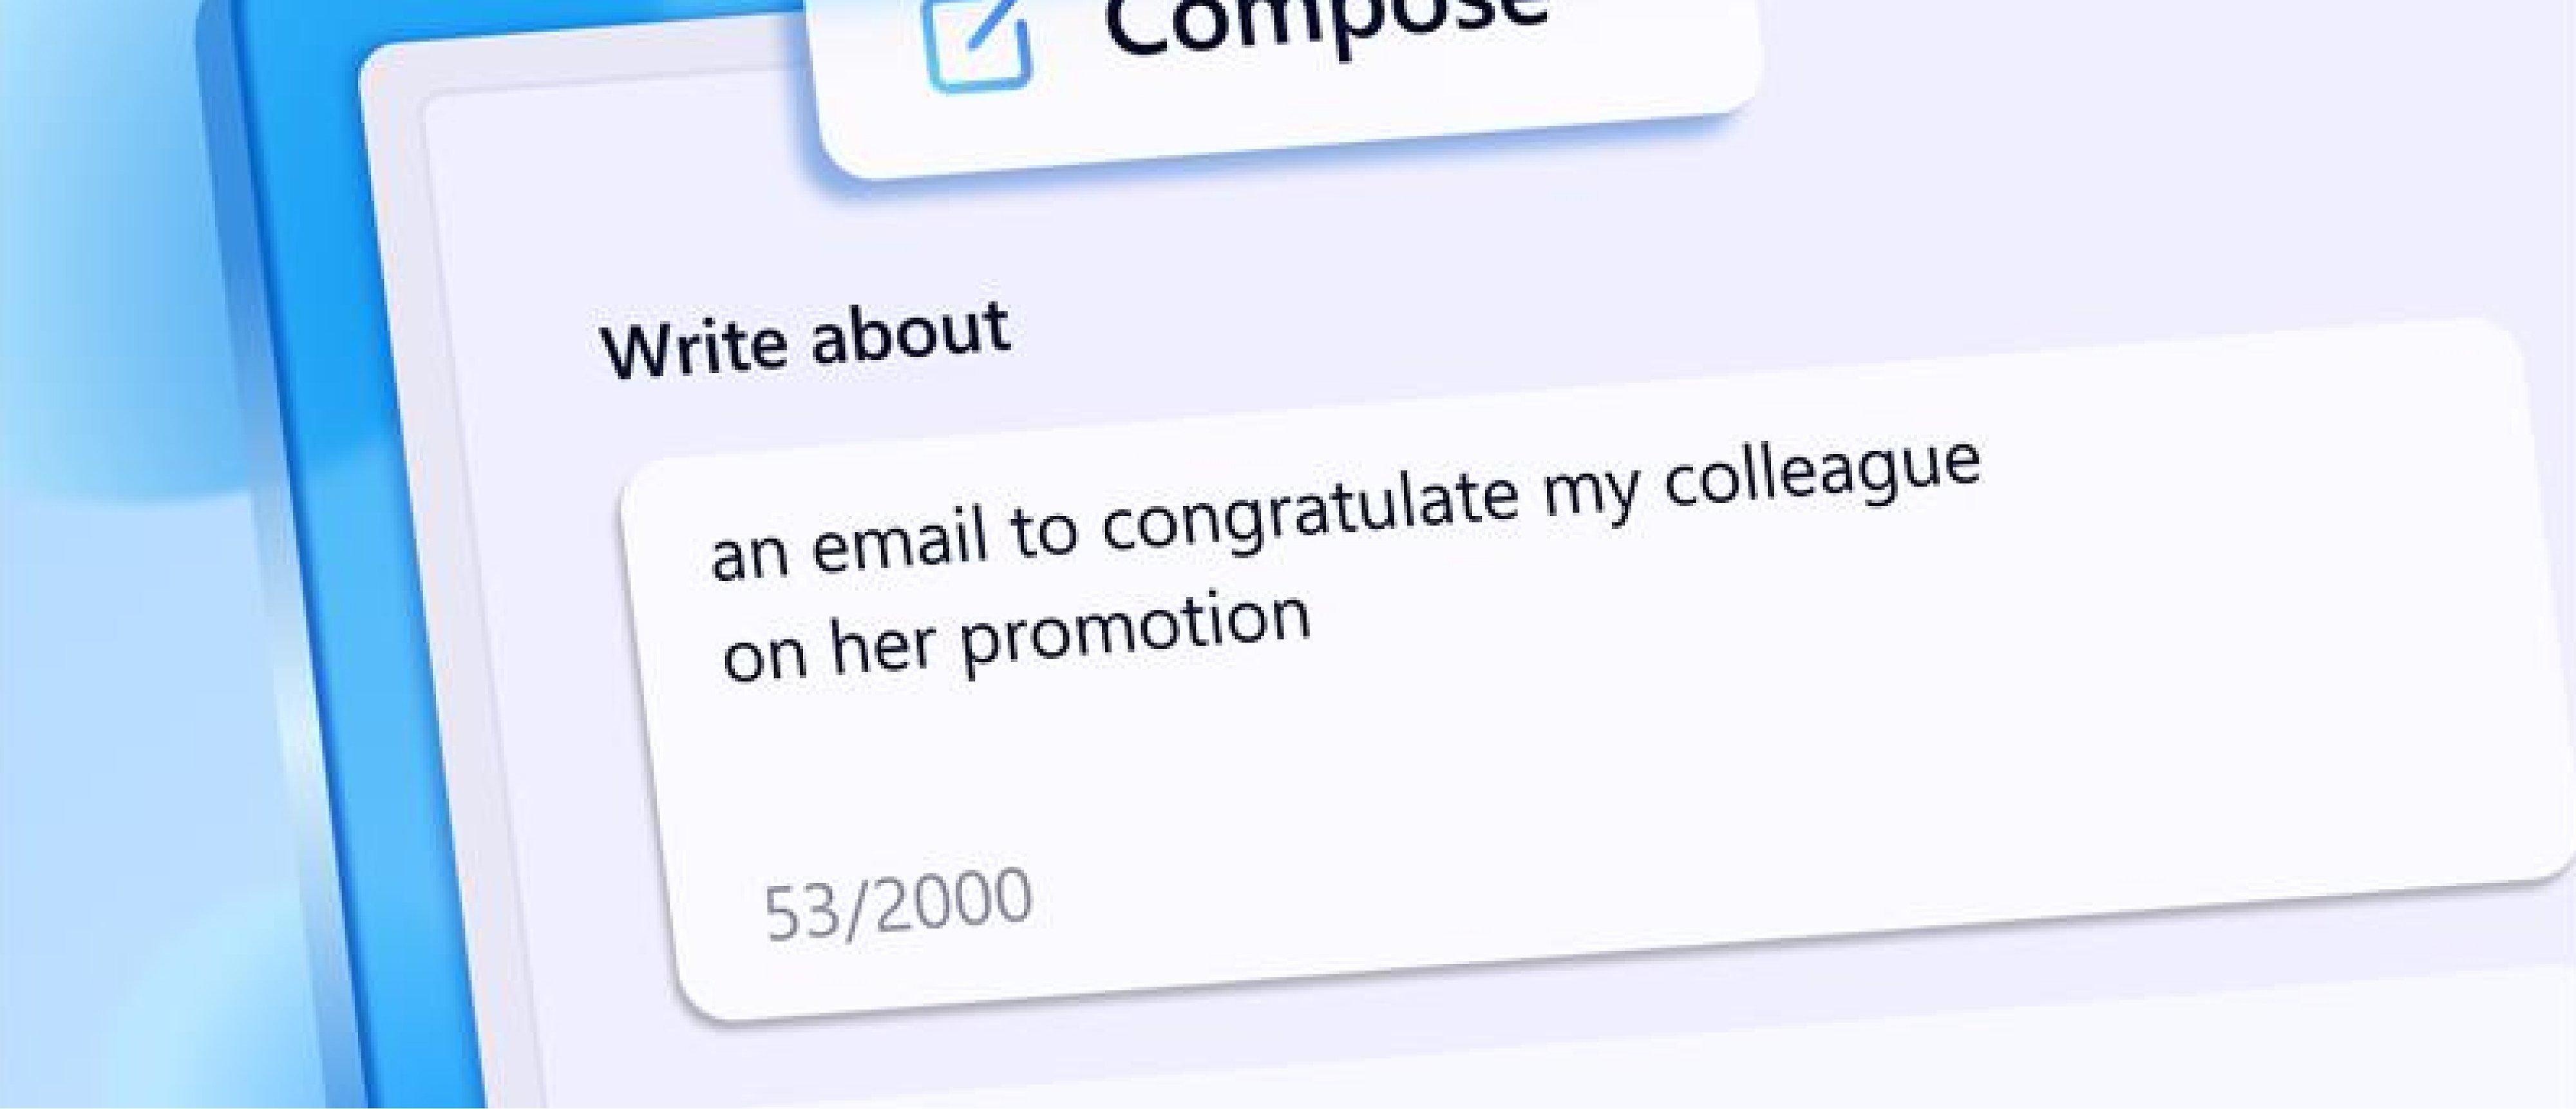 A screenshot of a prompt to an AI to write an email congratulating a colleague on her promotion